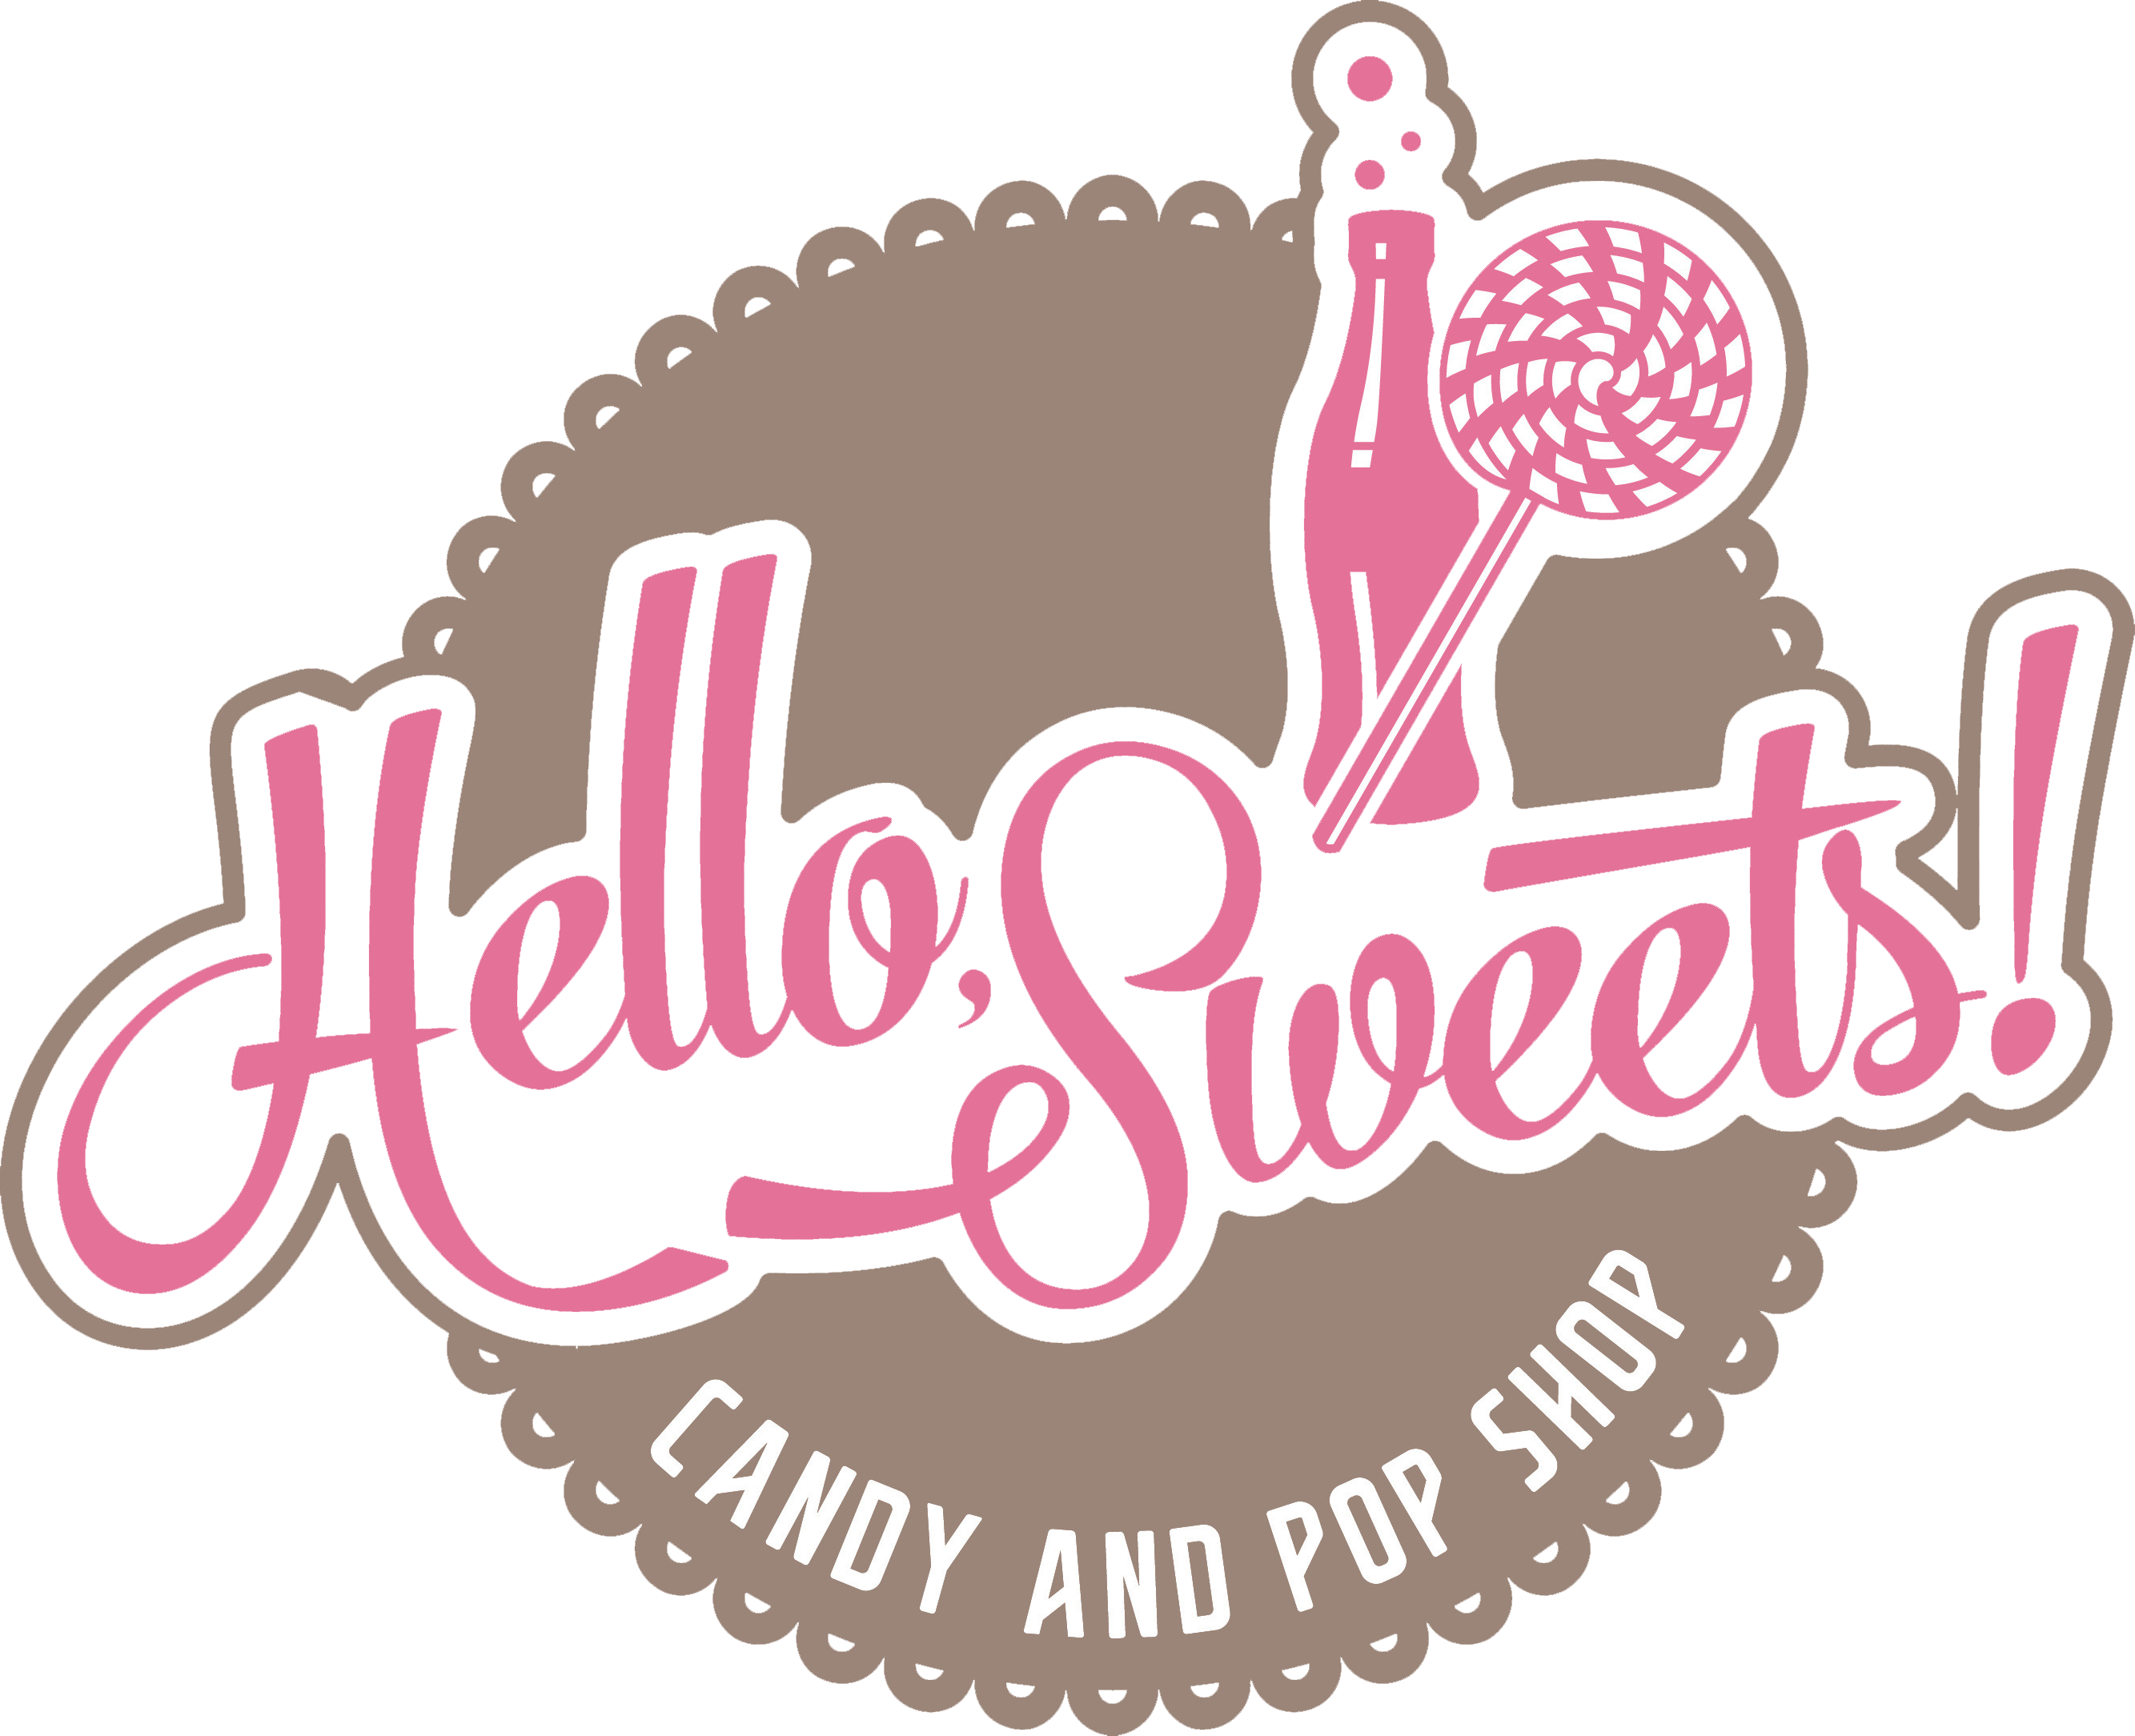 candy candy candy logo